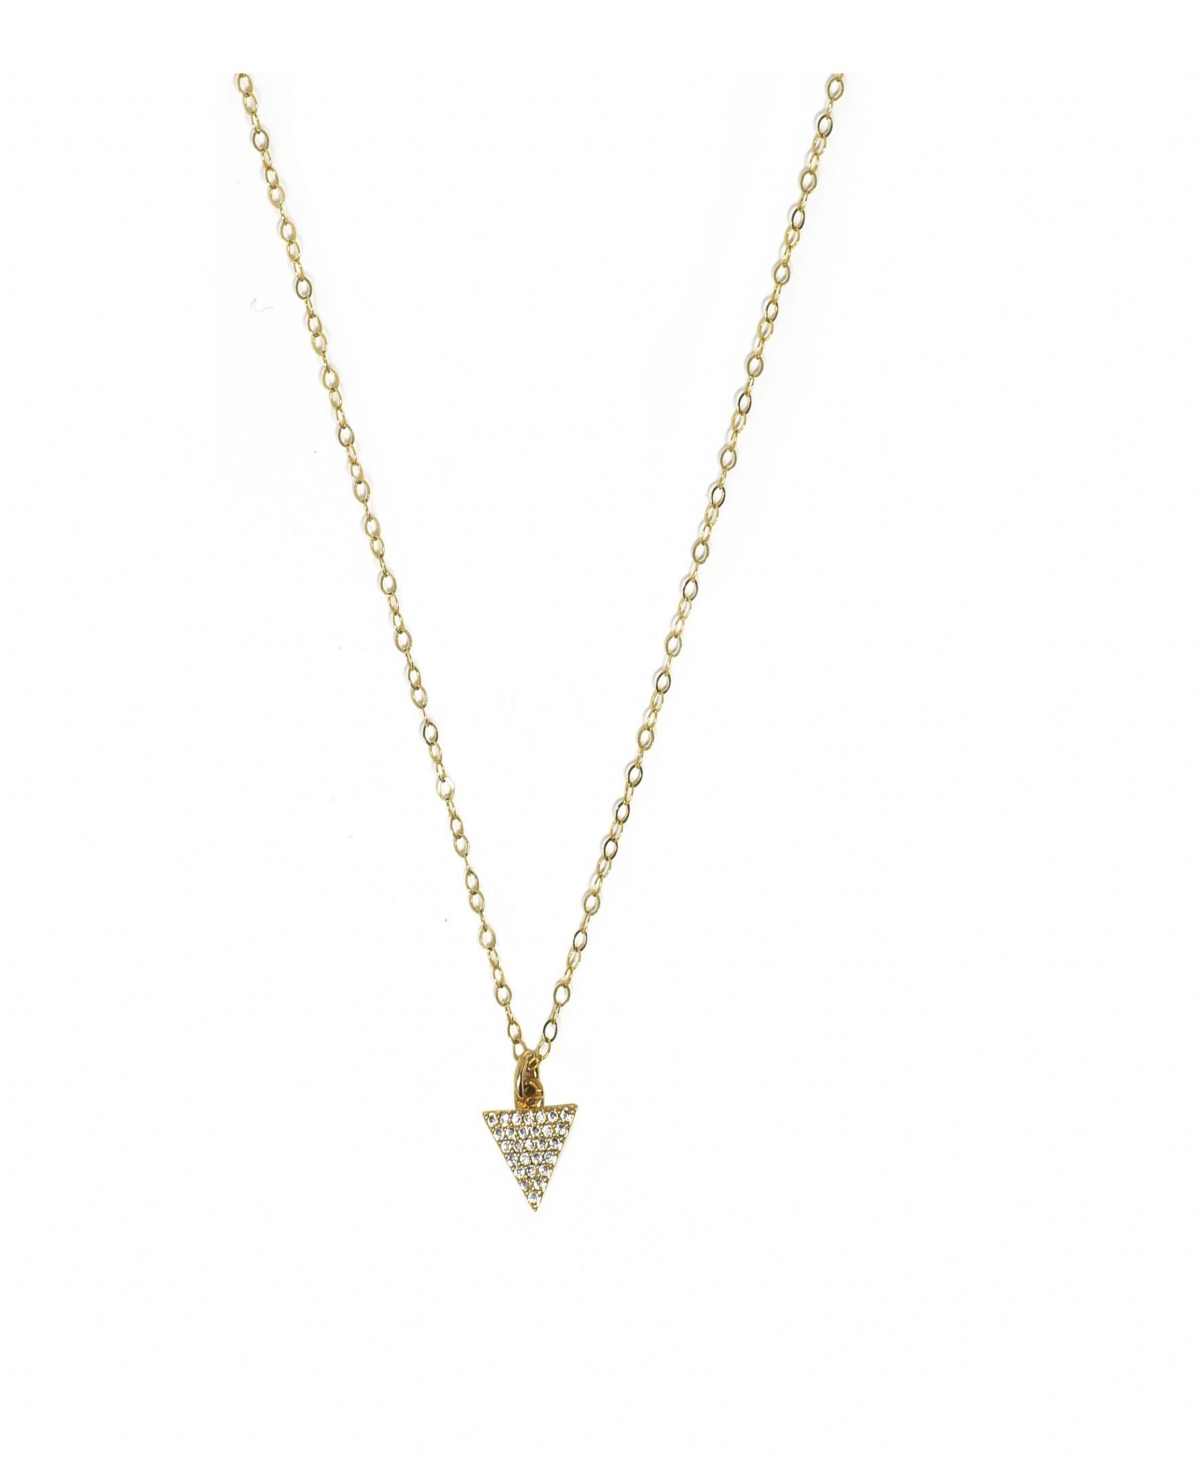 14k Gold Filled Pave Triangle Charm On Chain - Clear Quartz